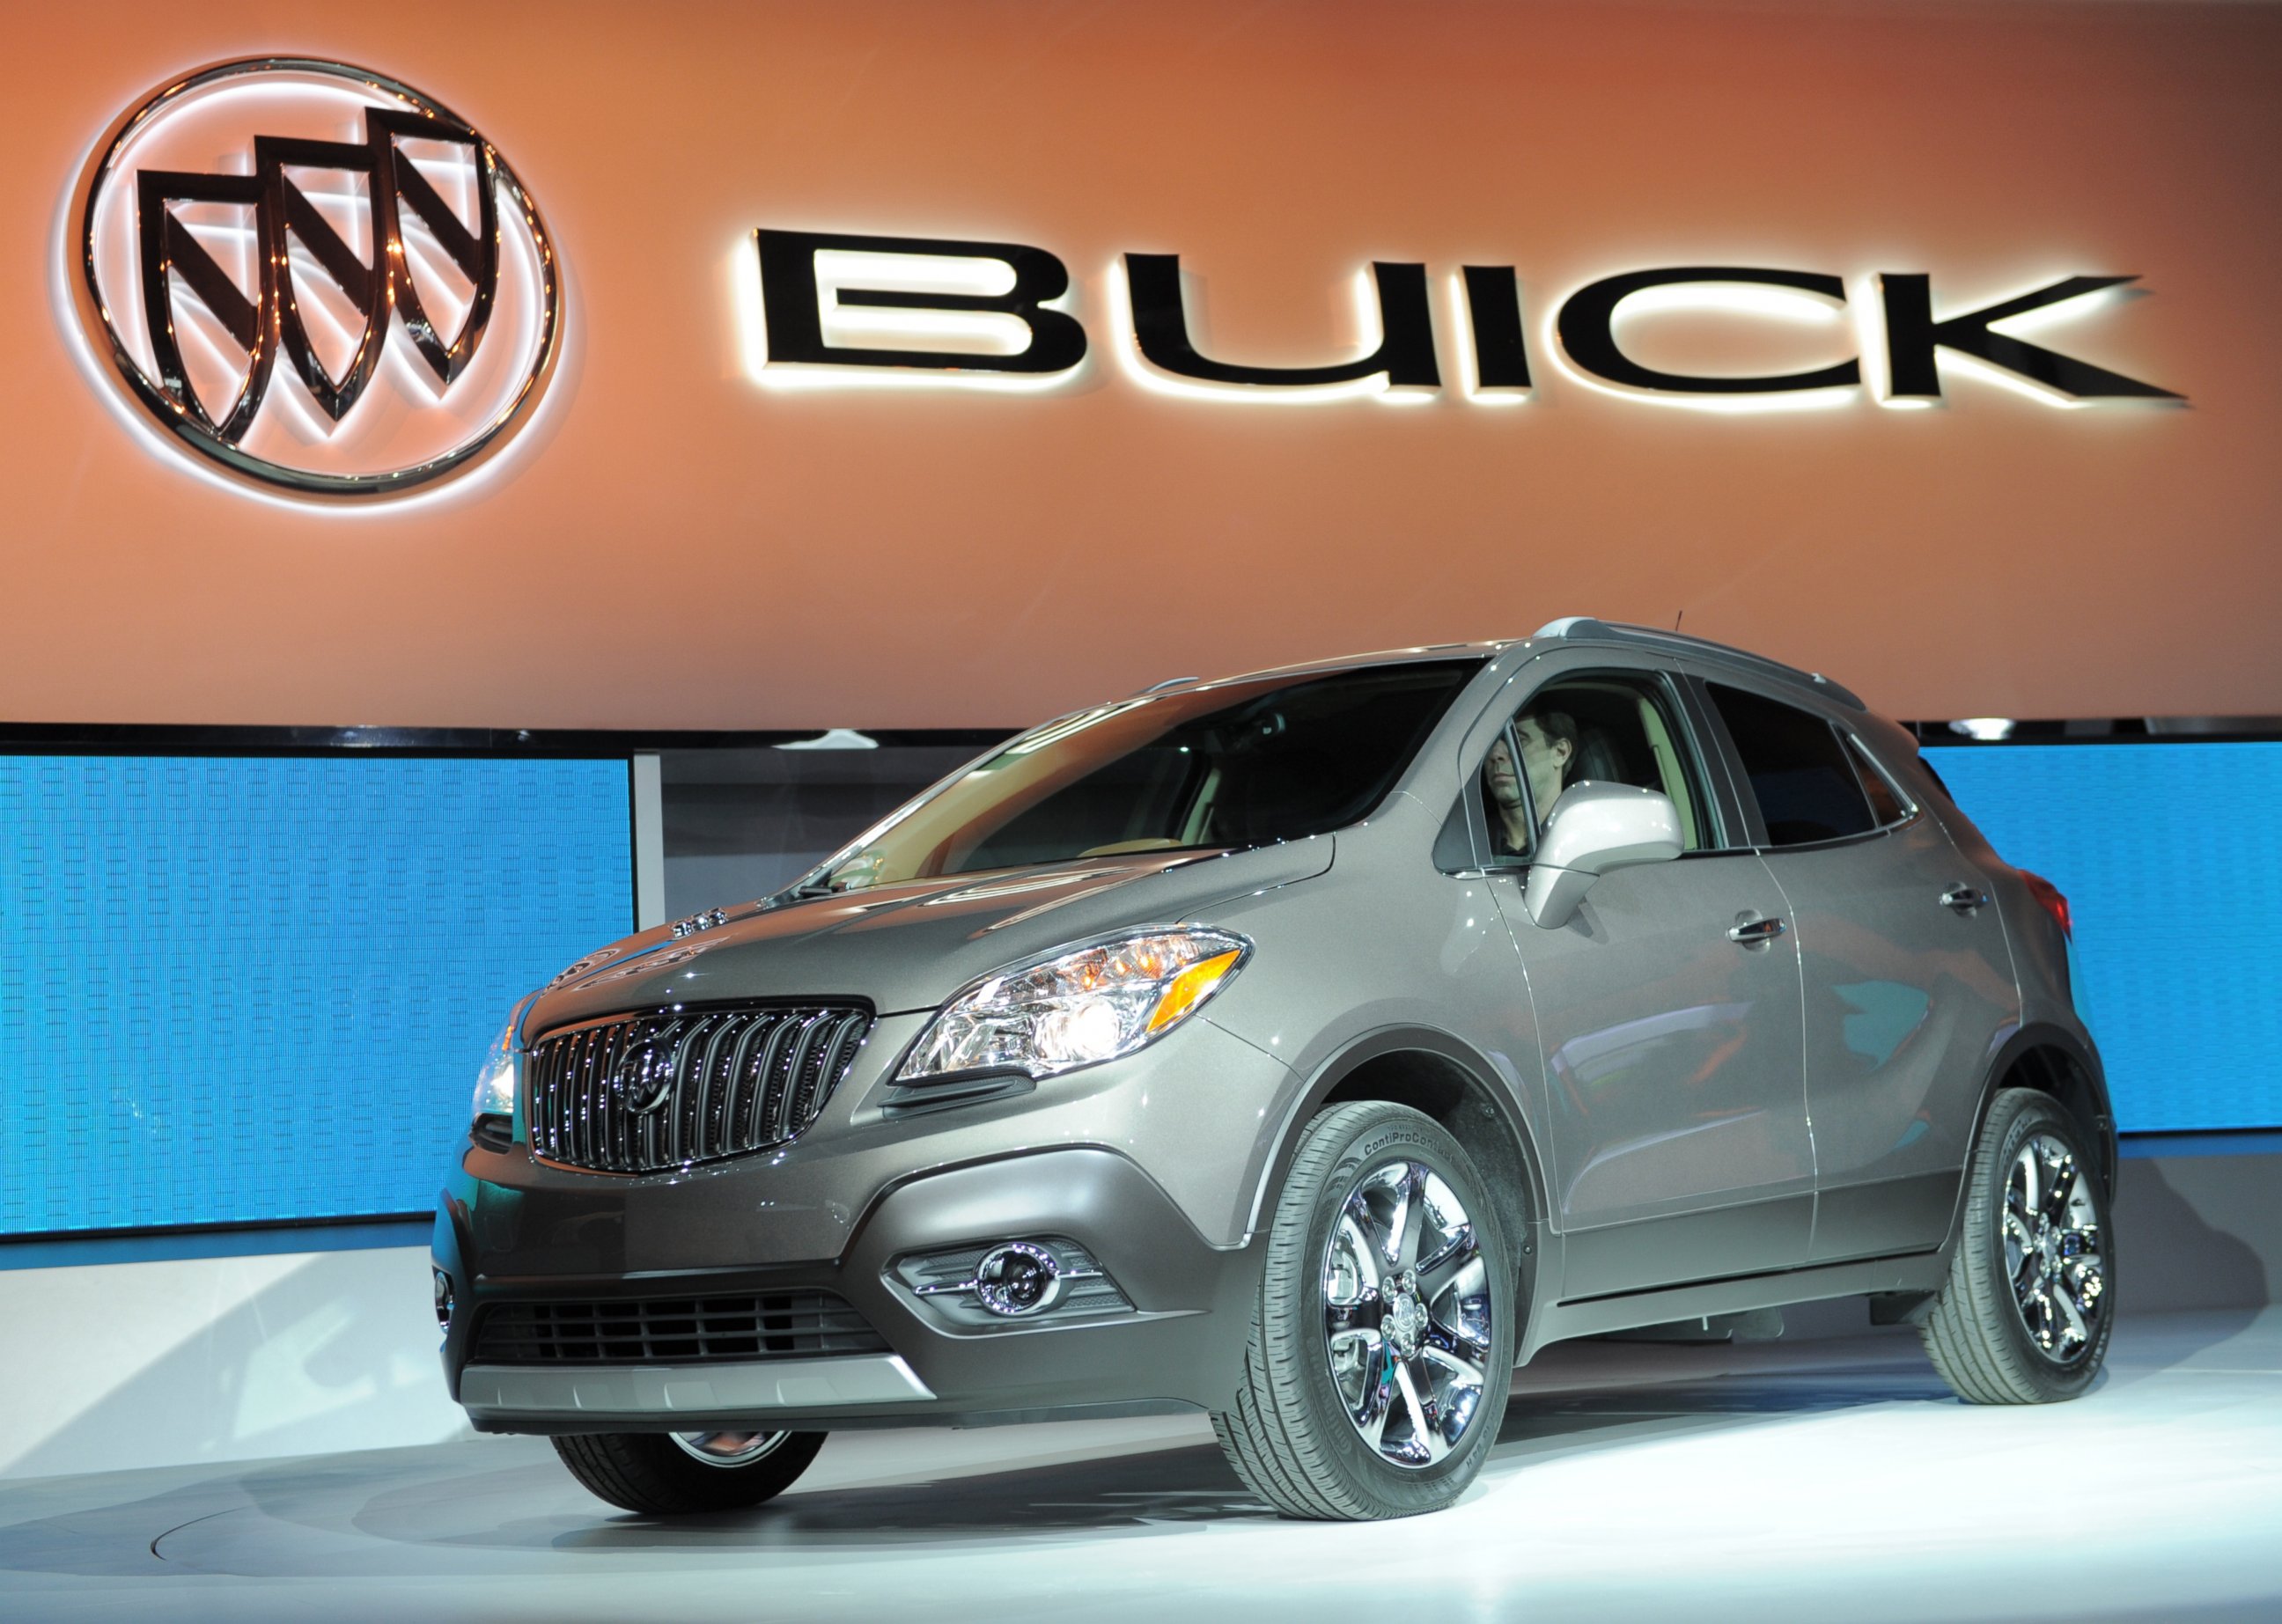 PHOTO: The 2013 Buick Encore Crossover SUV is introduced during the press preview day at the 2012 North American International Auto Show, Jan. 10, 2012, in Detroit.